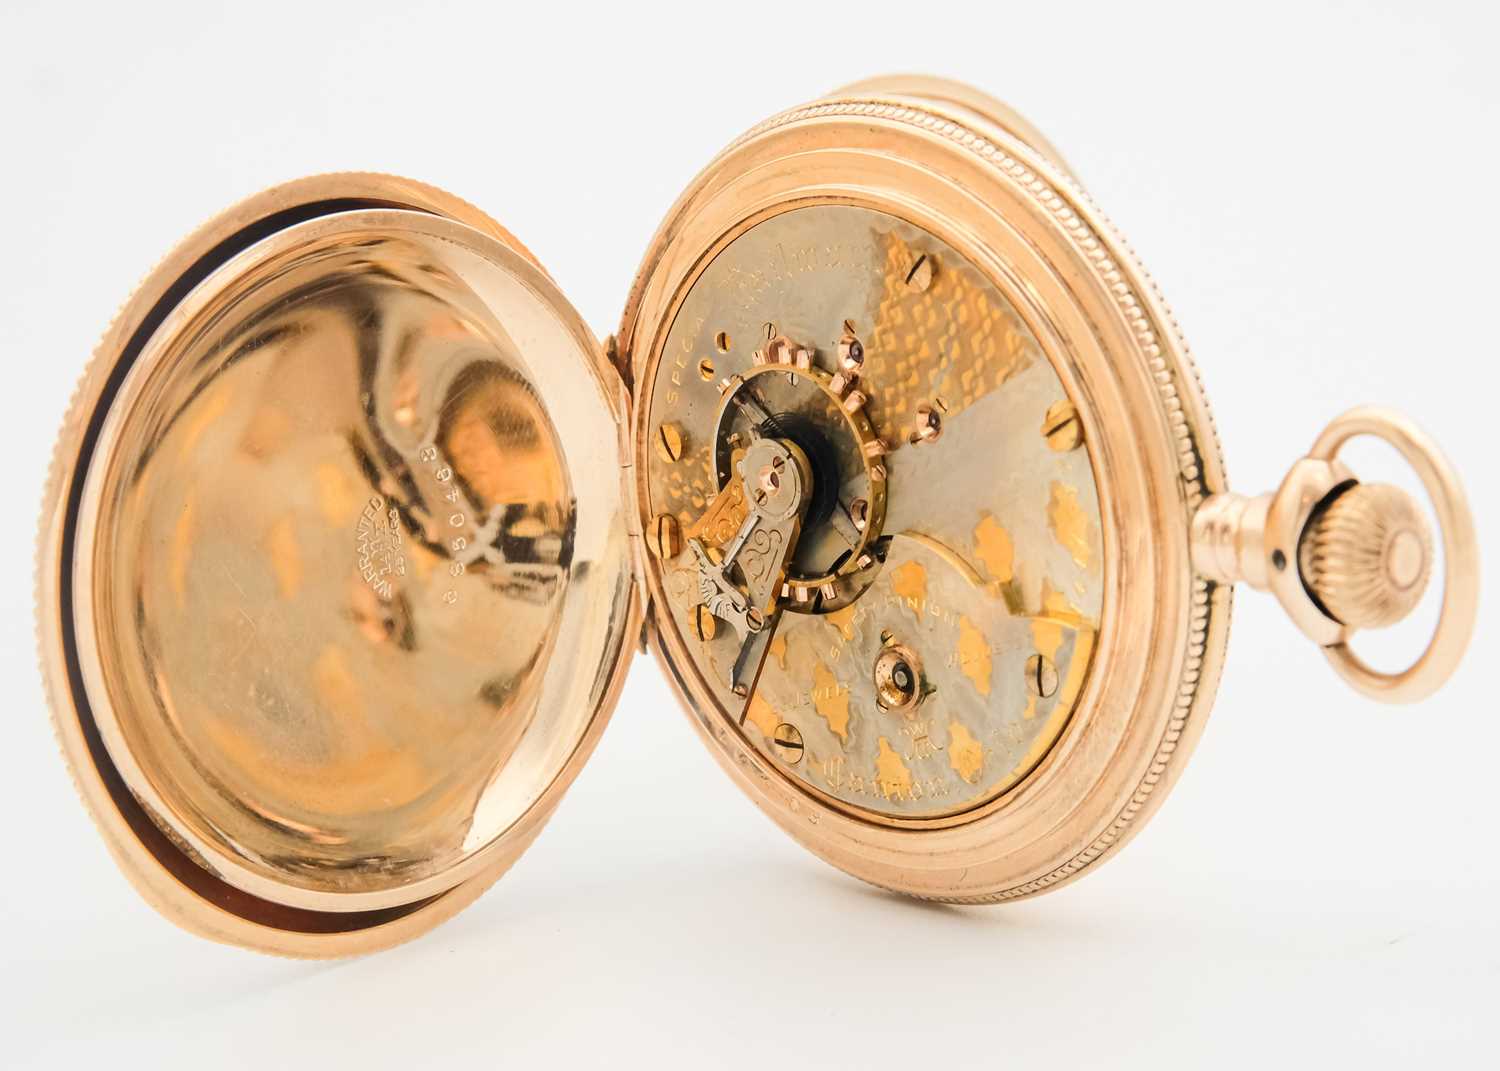 HAMPDEN WATCH CO. - A large rose gold plated full hunter crown wind pocket watch. - Image 3 of 6